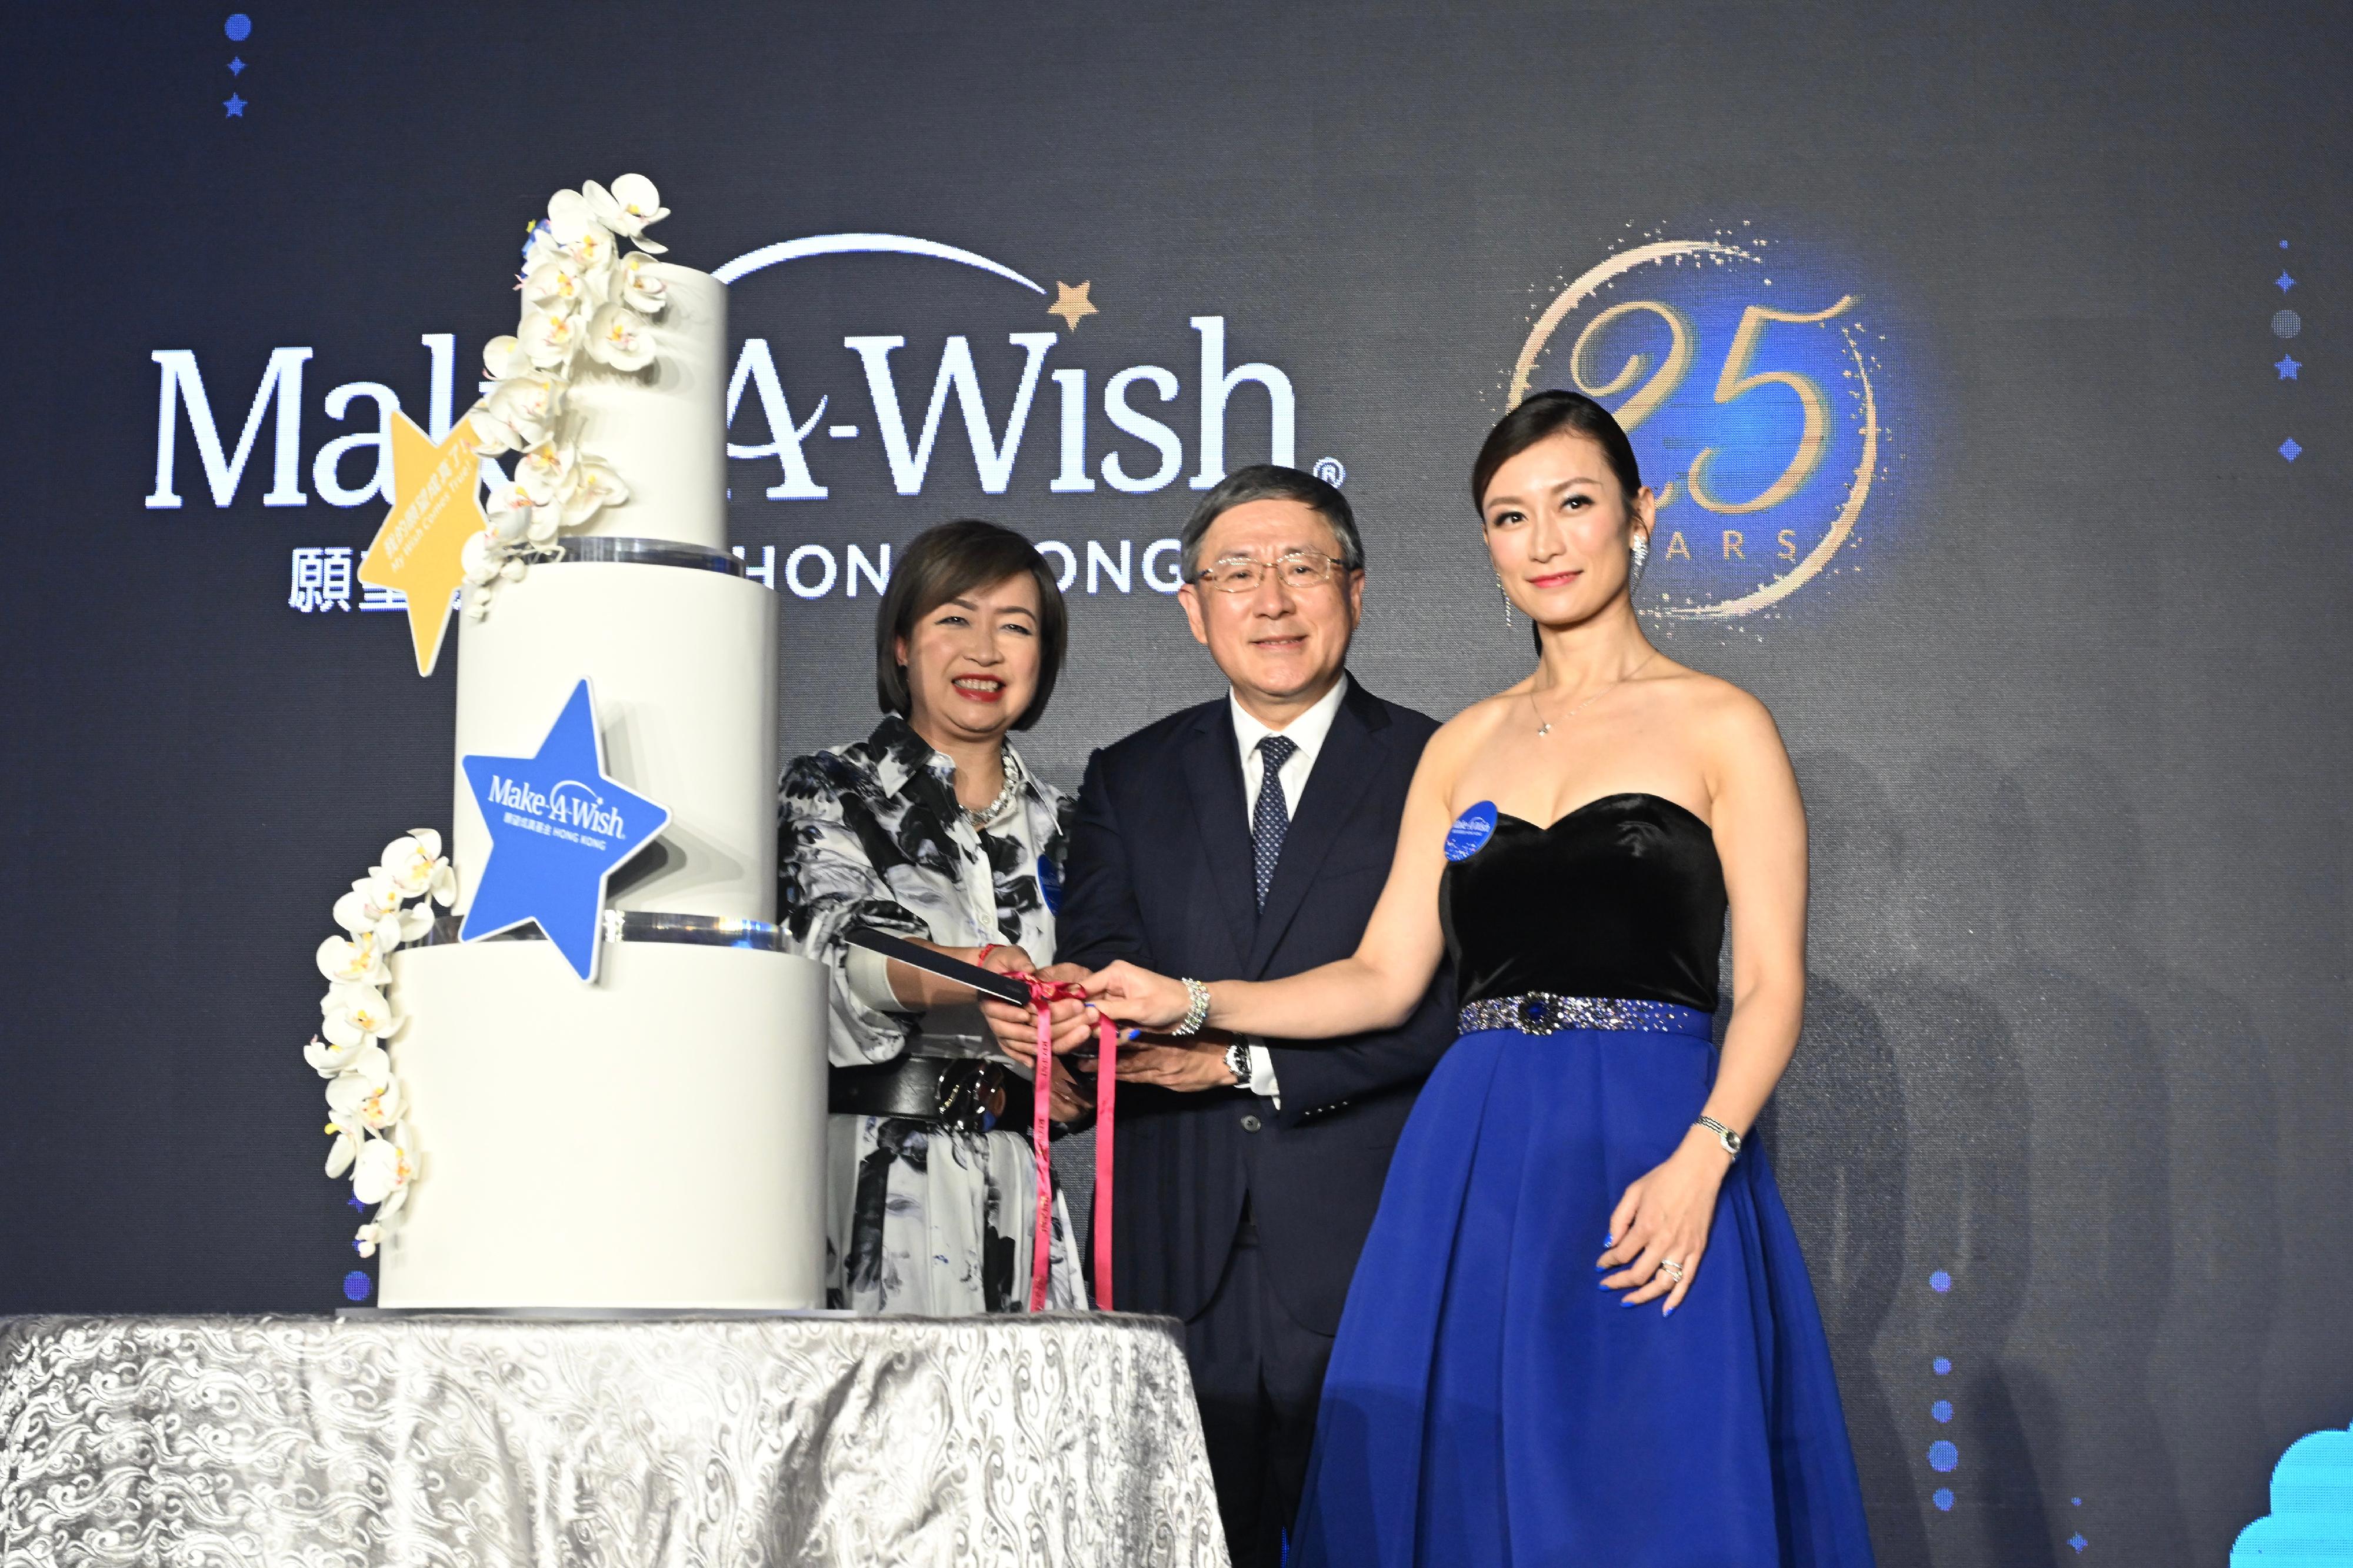 The Deputy Chief Secretary for Administration, Mr Cheuk Wing-hing (centre), the Chairperson of Make-A-Wish Hong Kong, Ms Anita Lai (left), and member Mrs Colleen Yu Fung (right) host a cake-cutting ceremony at Make-A-Wish Hong Kong 25th Anniversary Gala Dinner tonight (March 3).